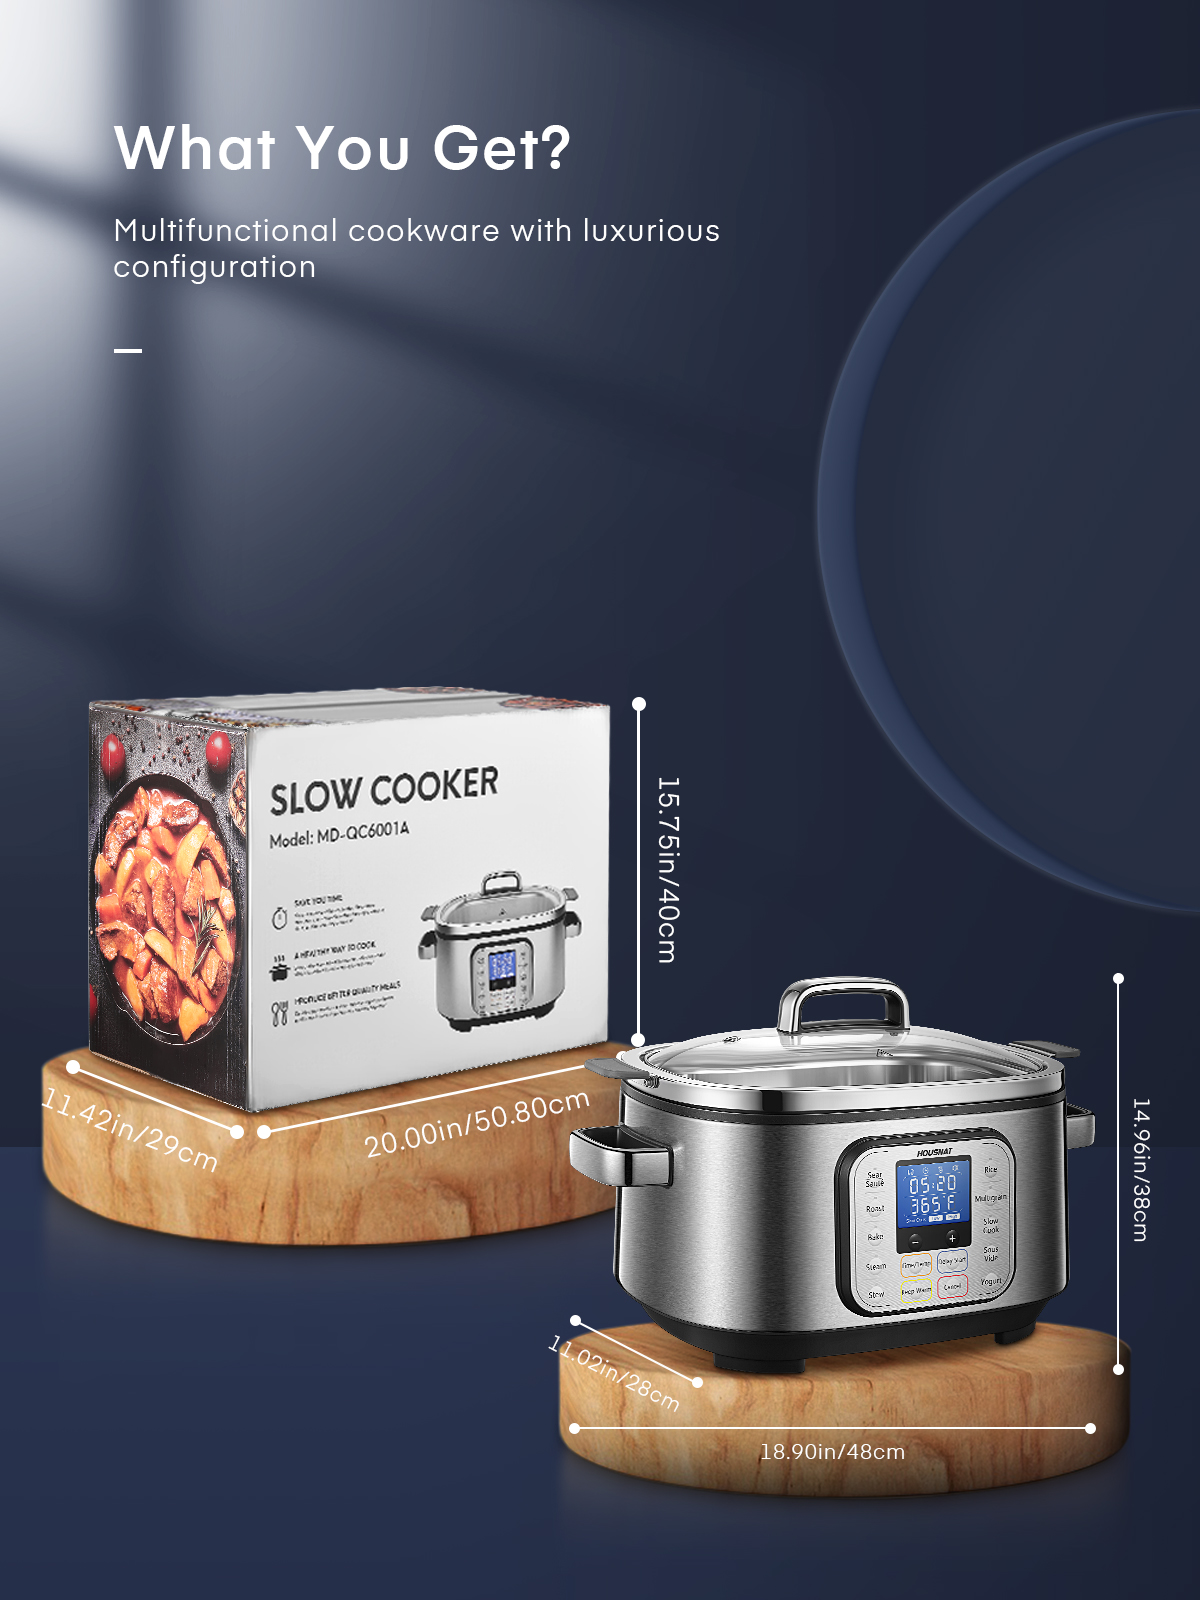 Slow Cooker, HOUSNAT 10 in 1 Programmable Cooker, 6Qt Stainless Steel, Rice Cooker, Yogurt Maker, Delay Start, Steaming Rack and Glass Lid, Adjustable Temp&Time for Slow Cook with Digital Timer - image 3 of 6